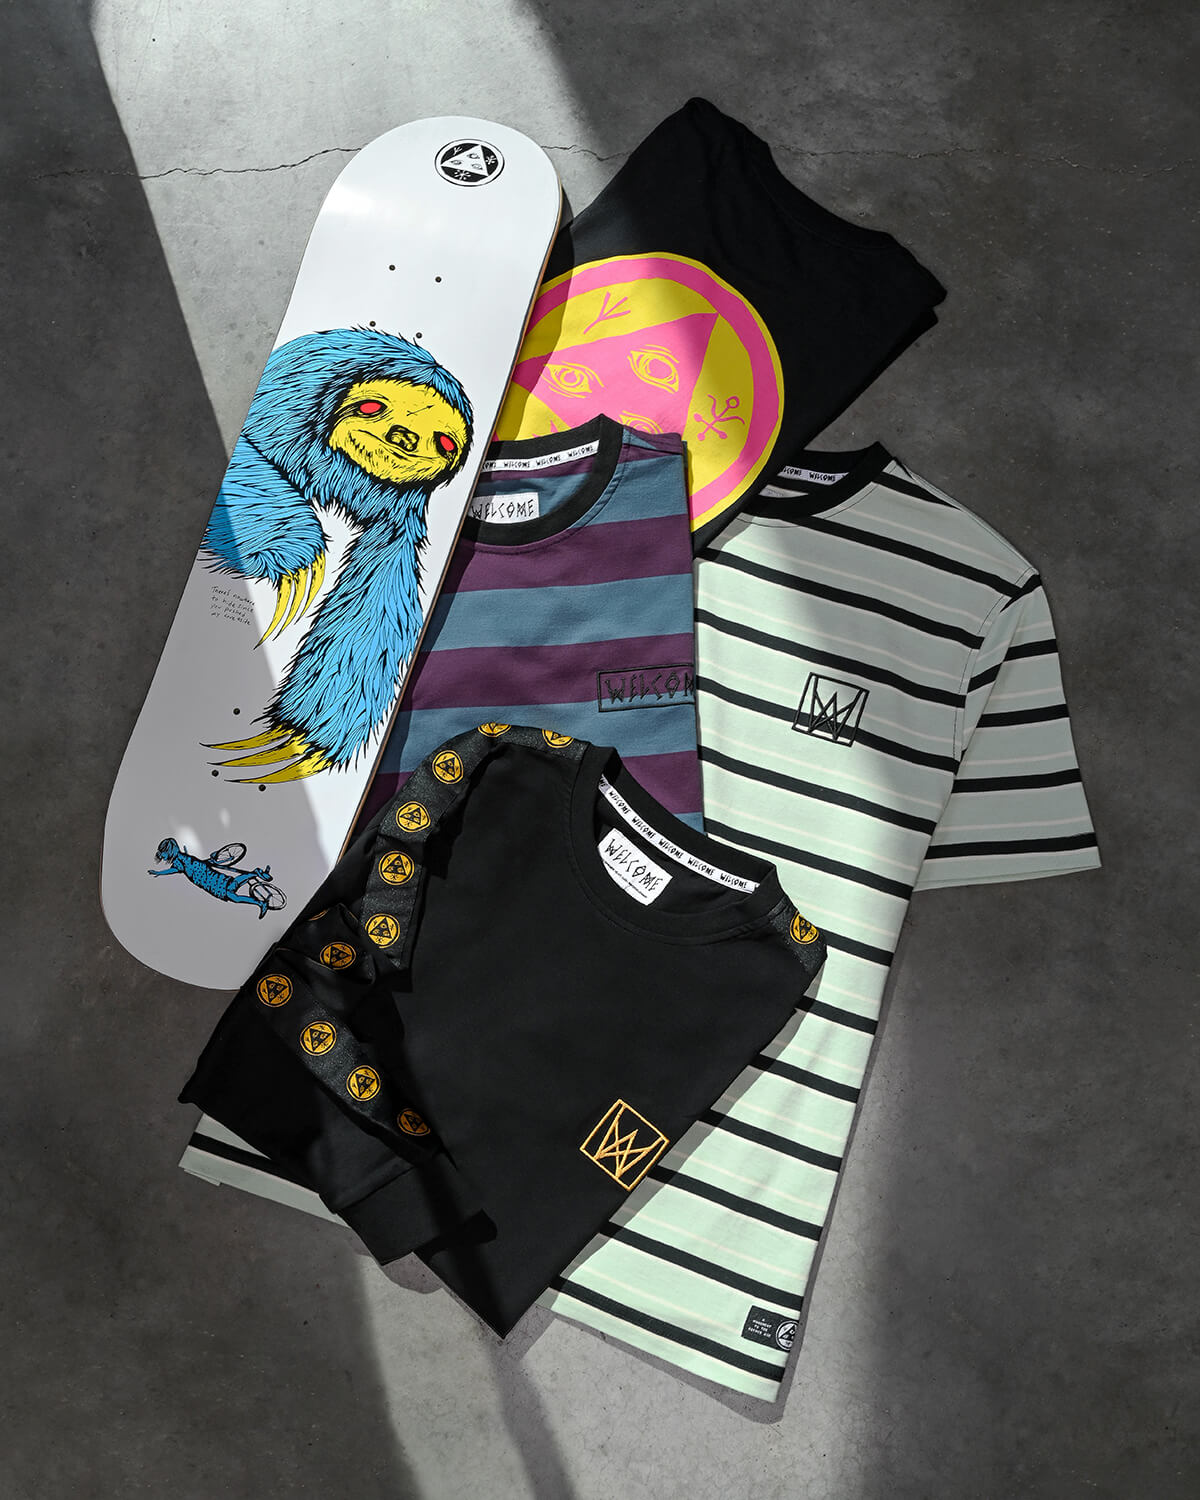 NEW ARRIVAL APPAREL AND SKATE GEAR FROM WELCOME - SHOP NOW